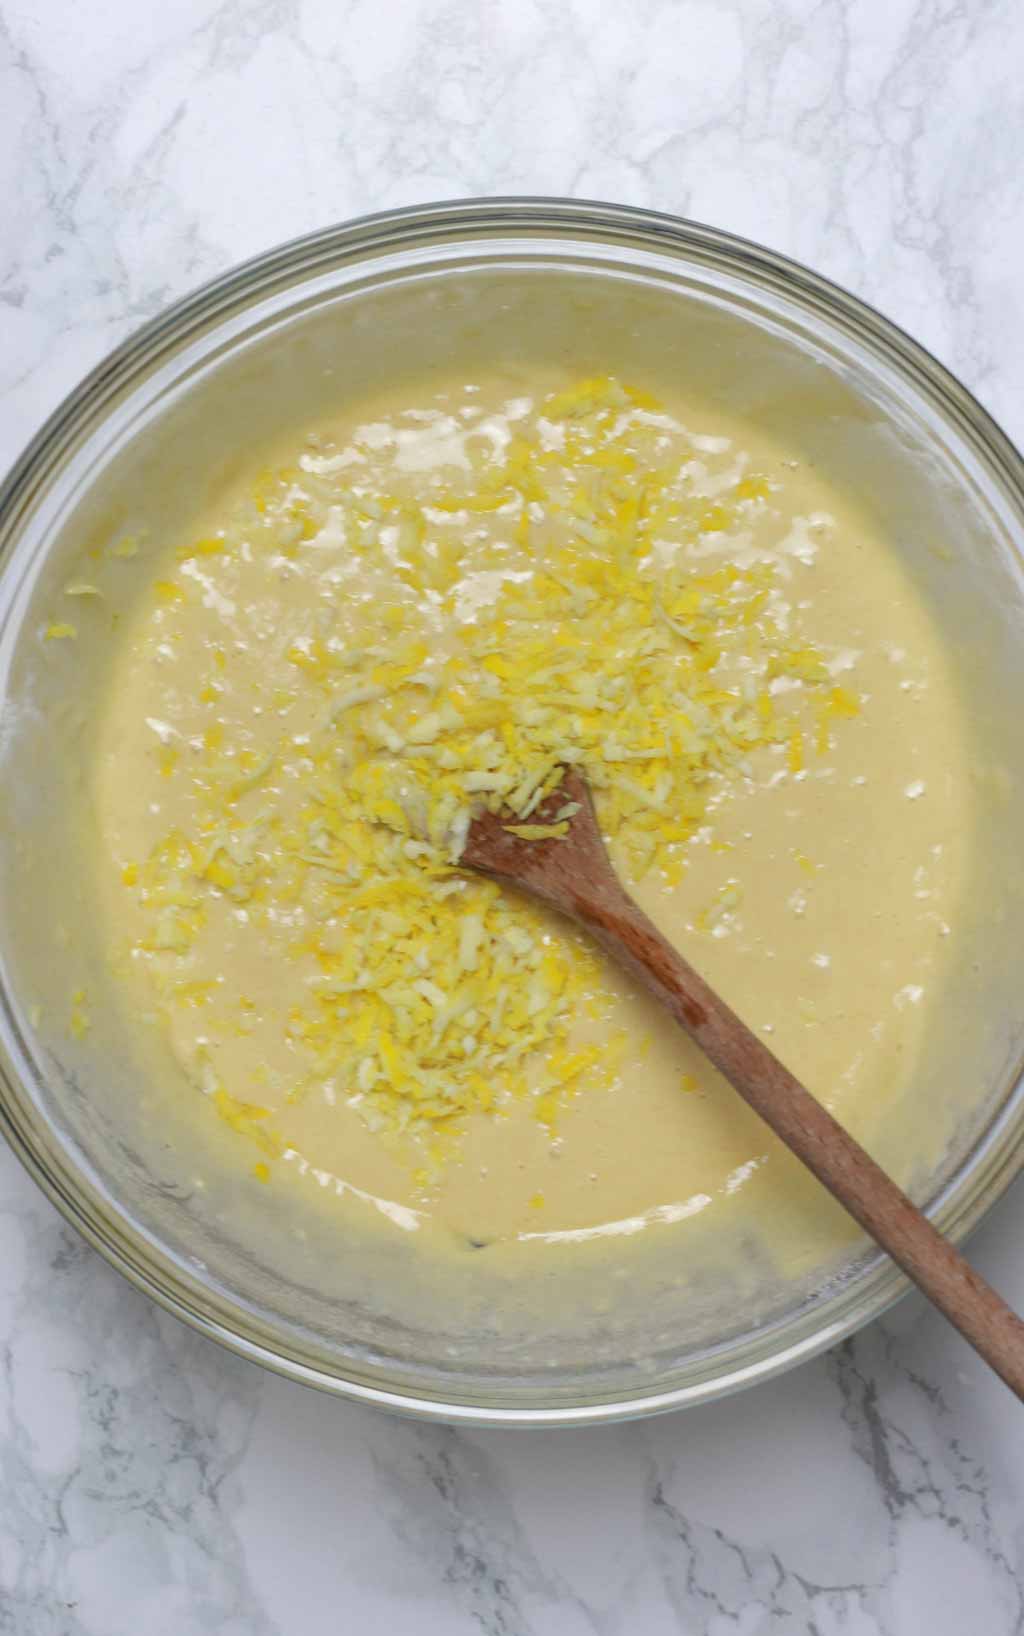 Cake Mix In A Bowl With Lemon Zest